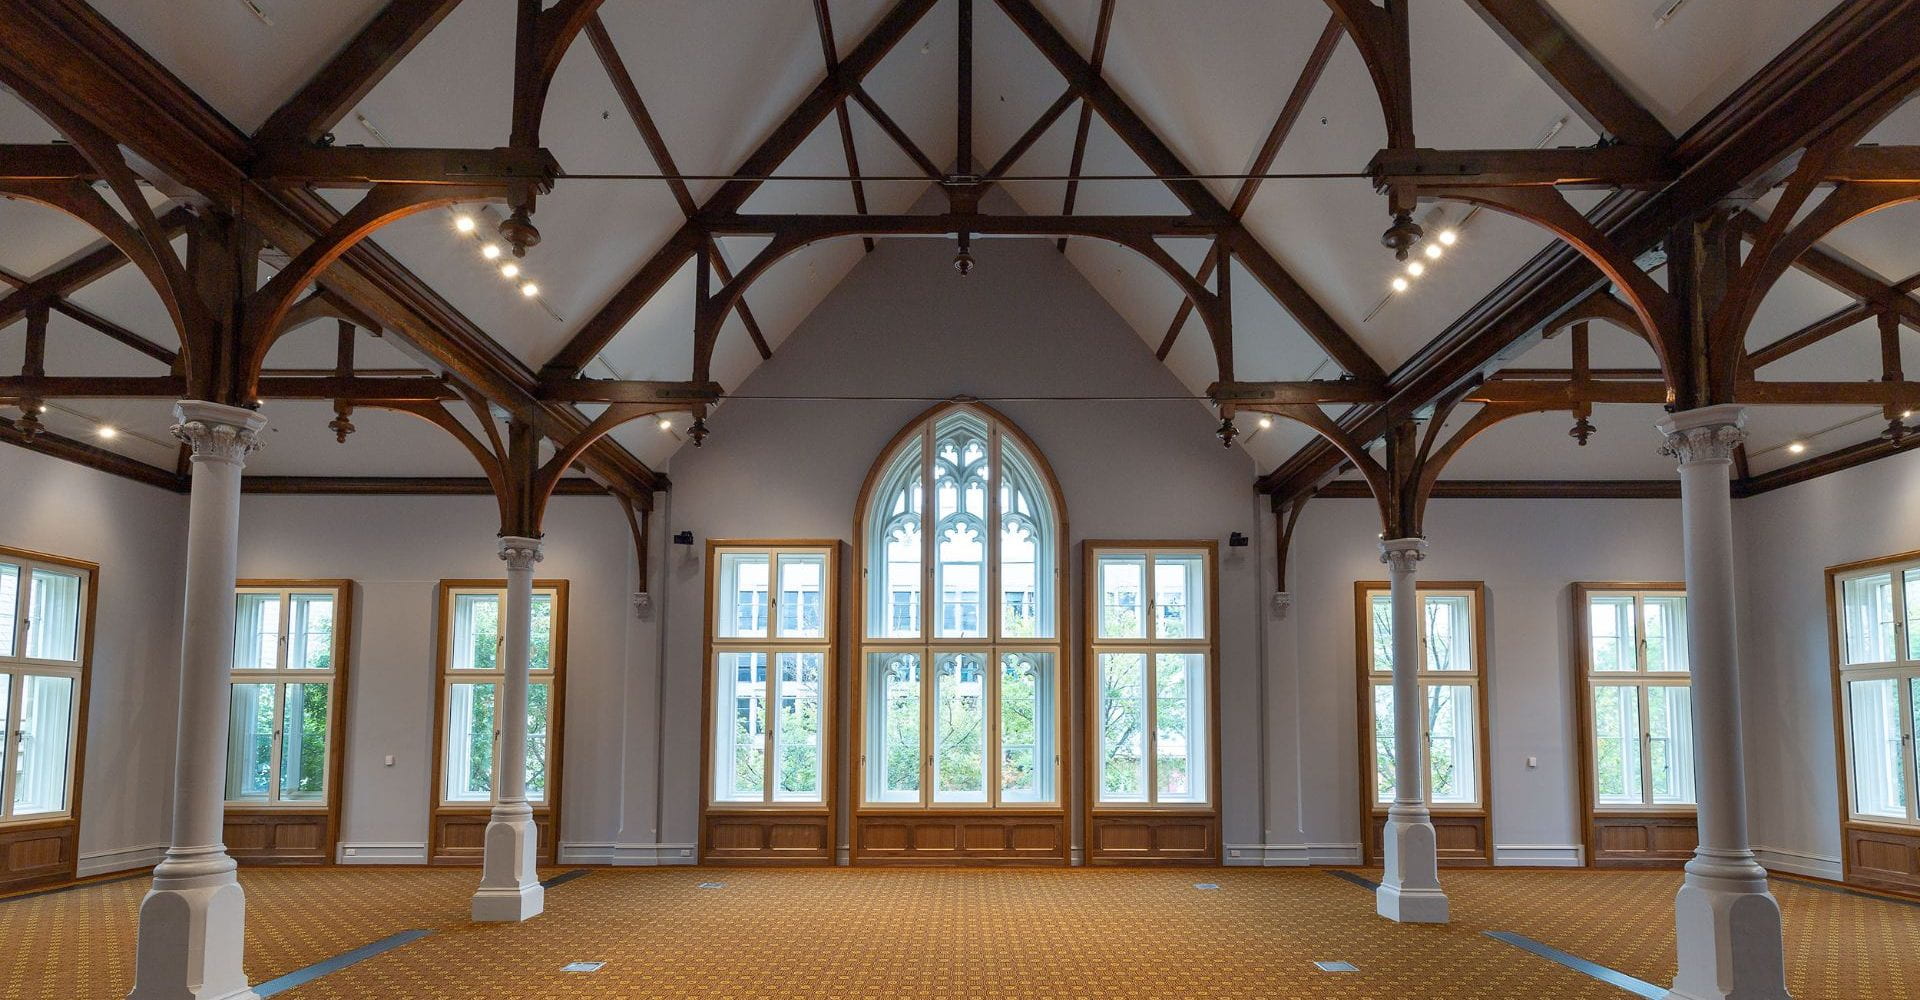 Photography of large interior room with orange carpet and high arched windows